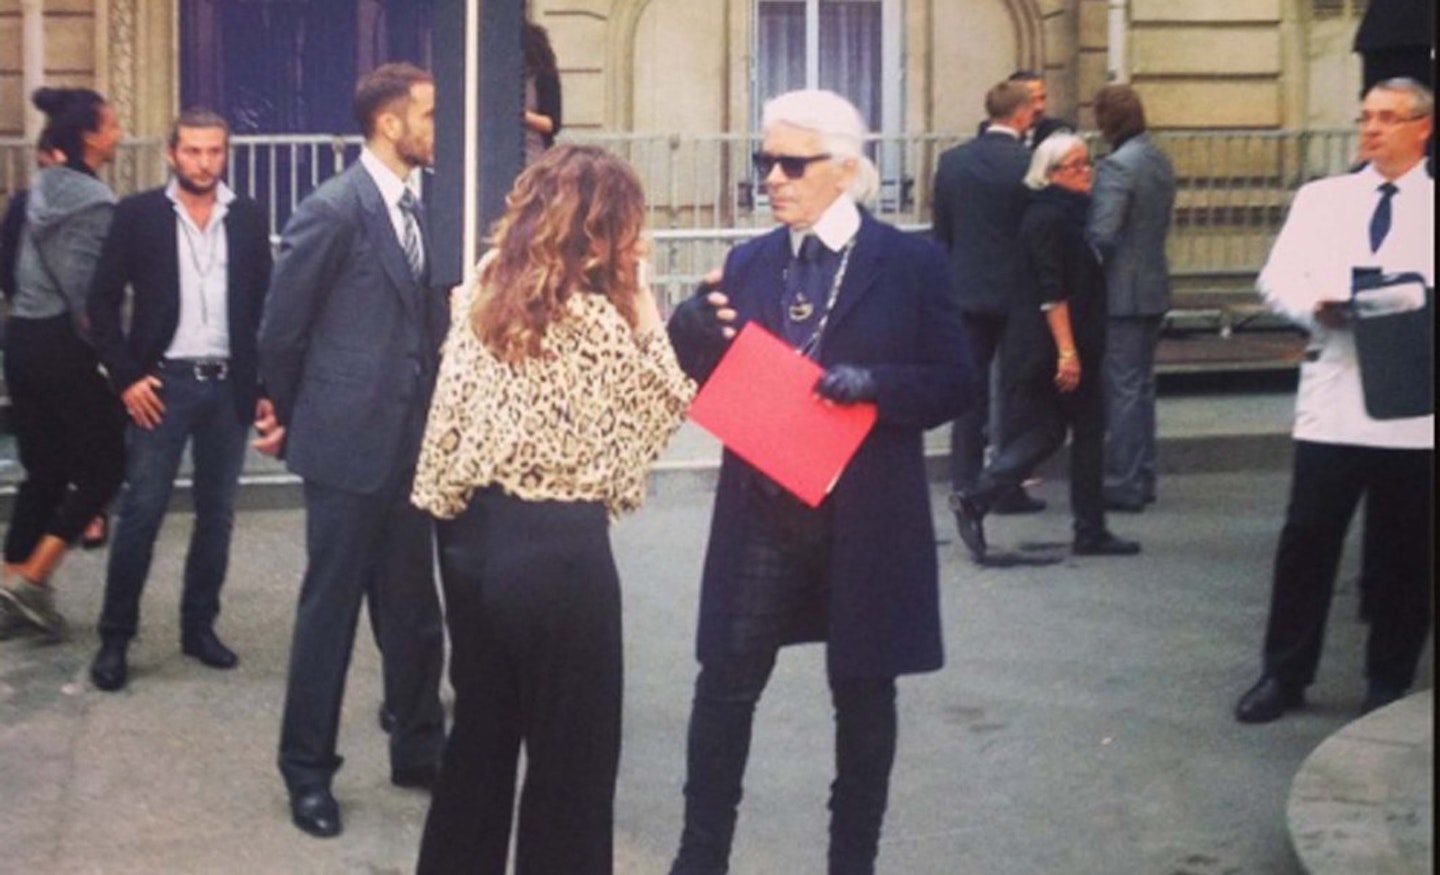 @Grazia_Live: And here's the man himself: Karl Lagerfeld having a natter on Boulevard Chanel after the show.